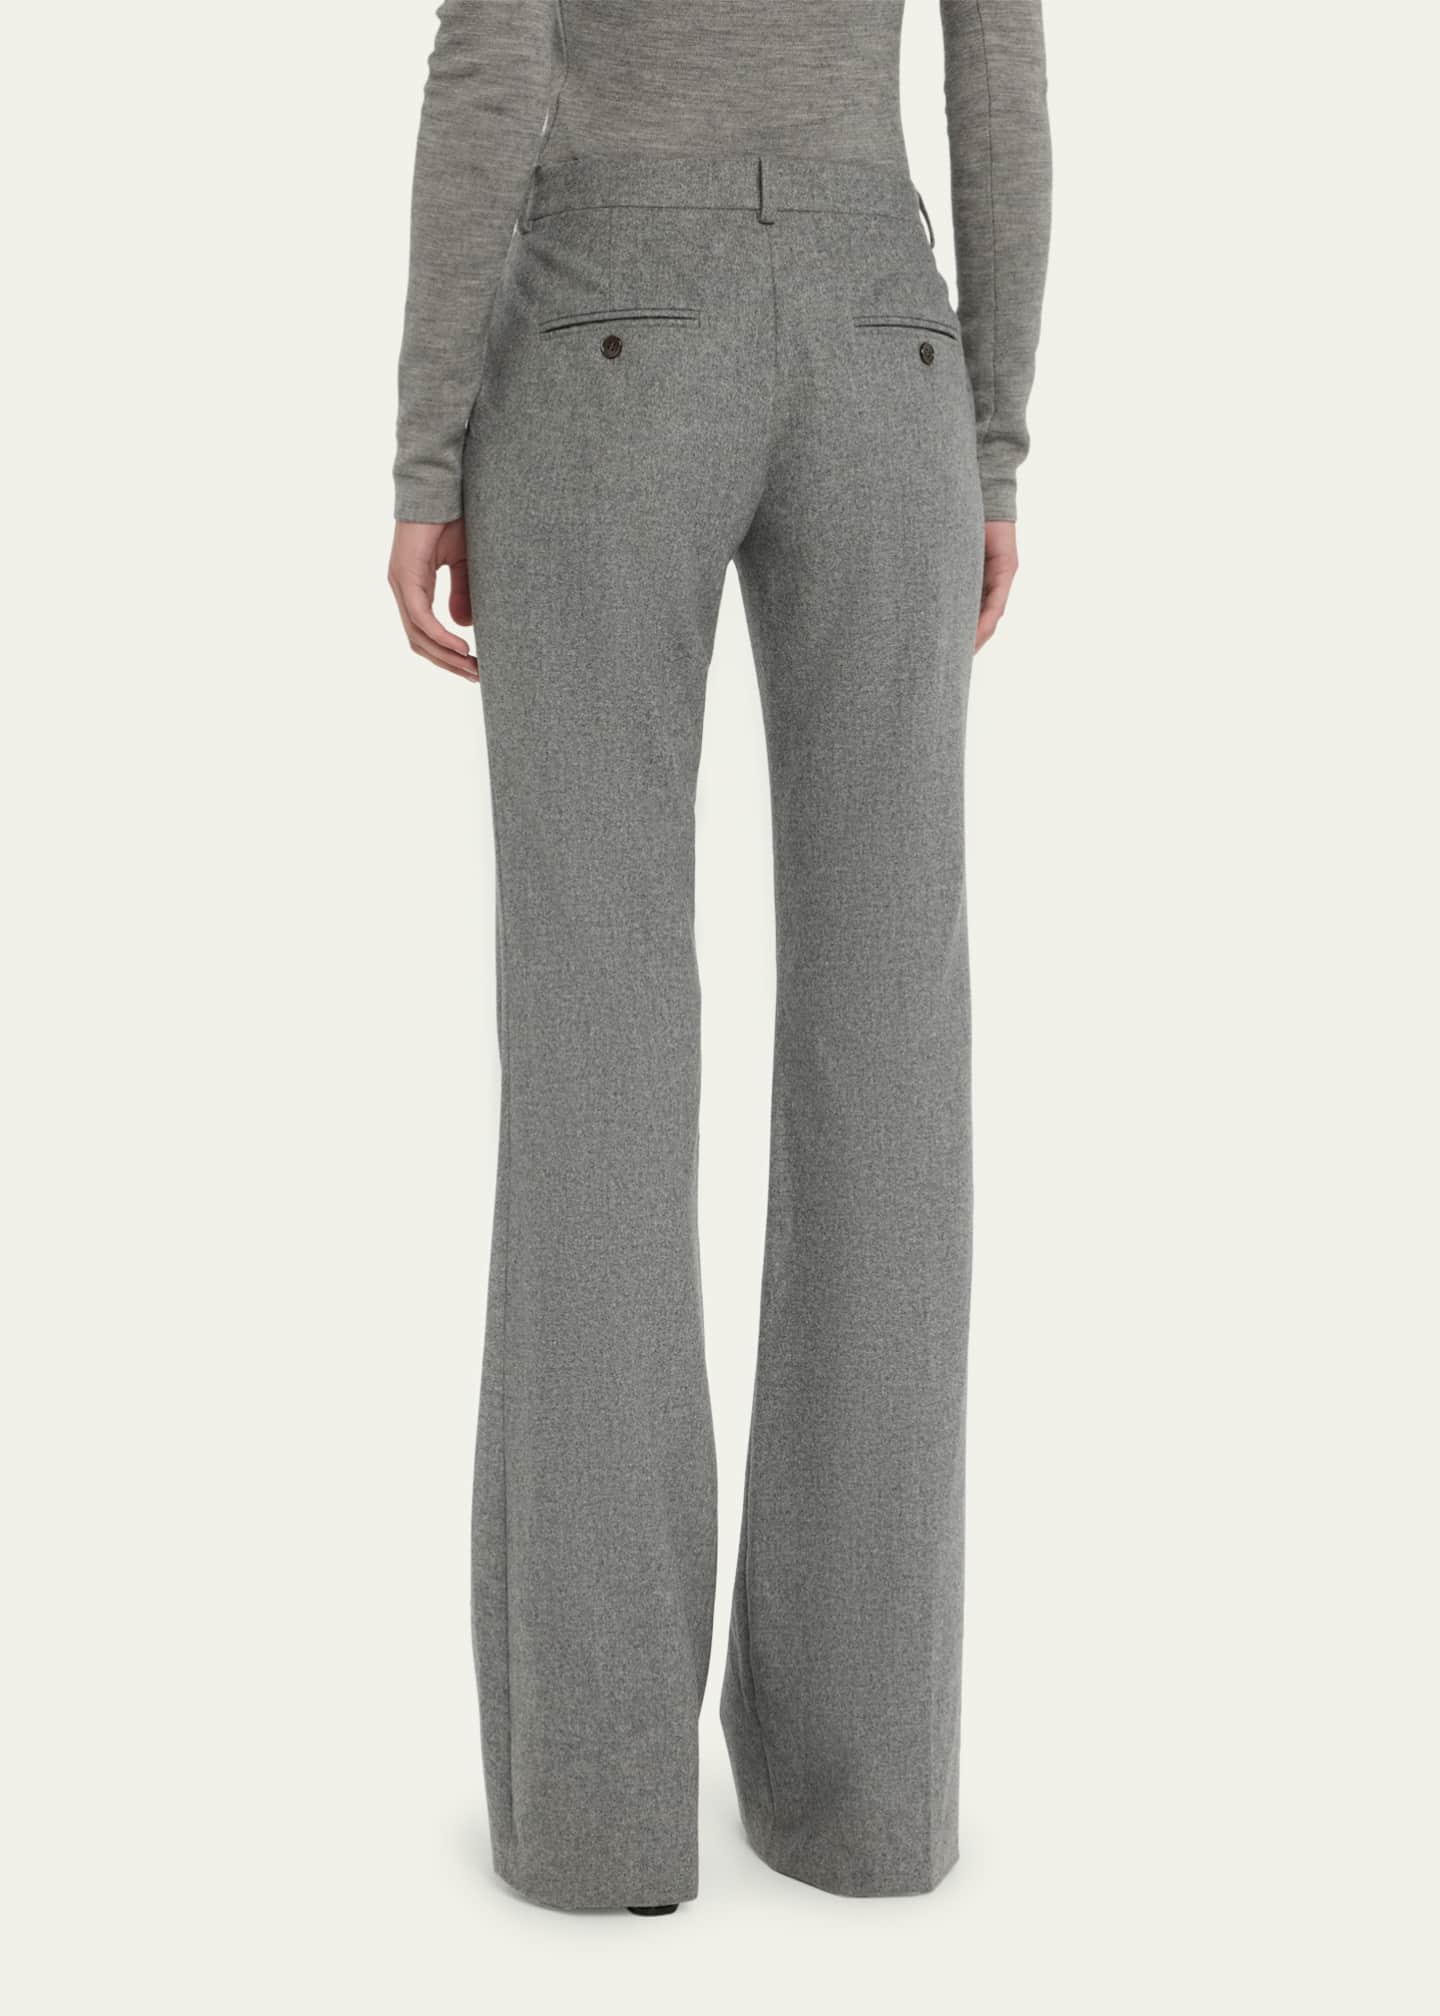 Michael Kors Collection Printed High-Rise Pants – Simply Audrey